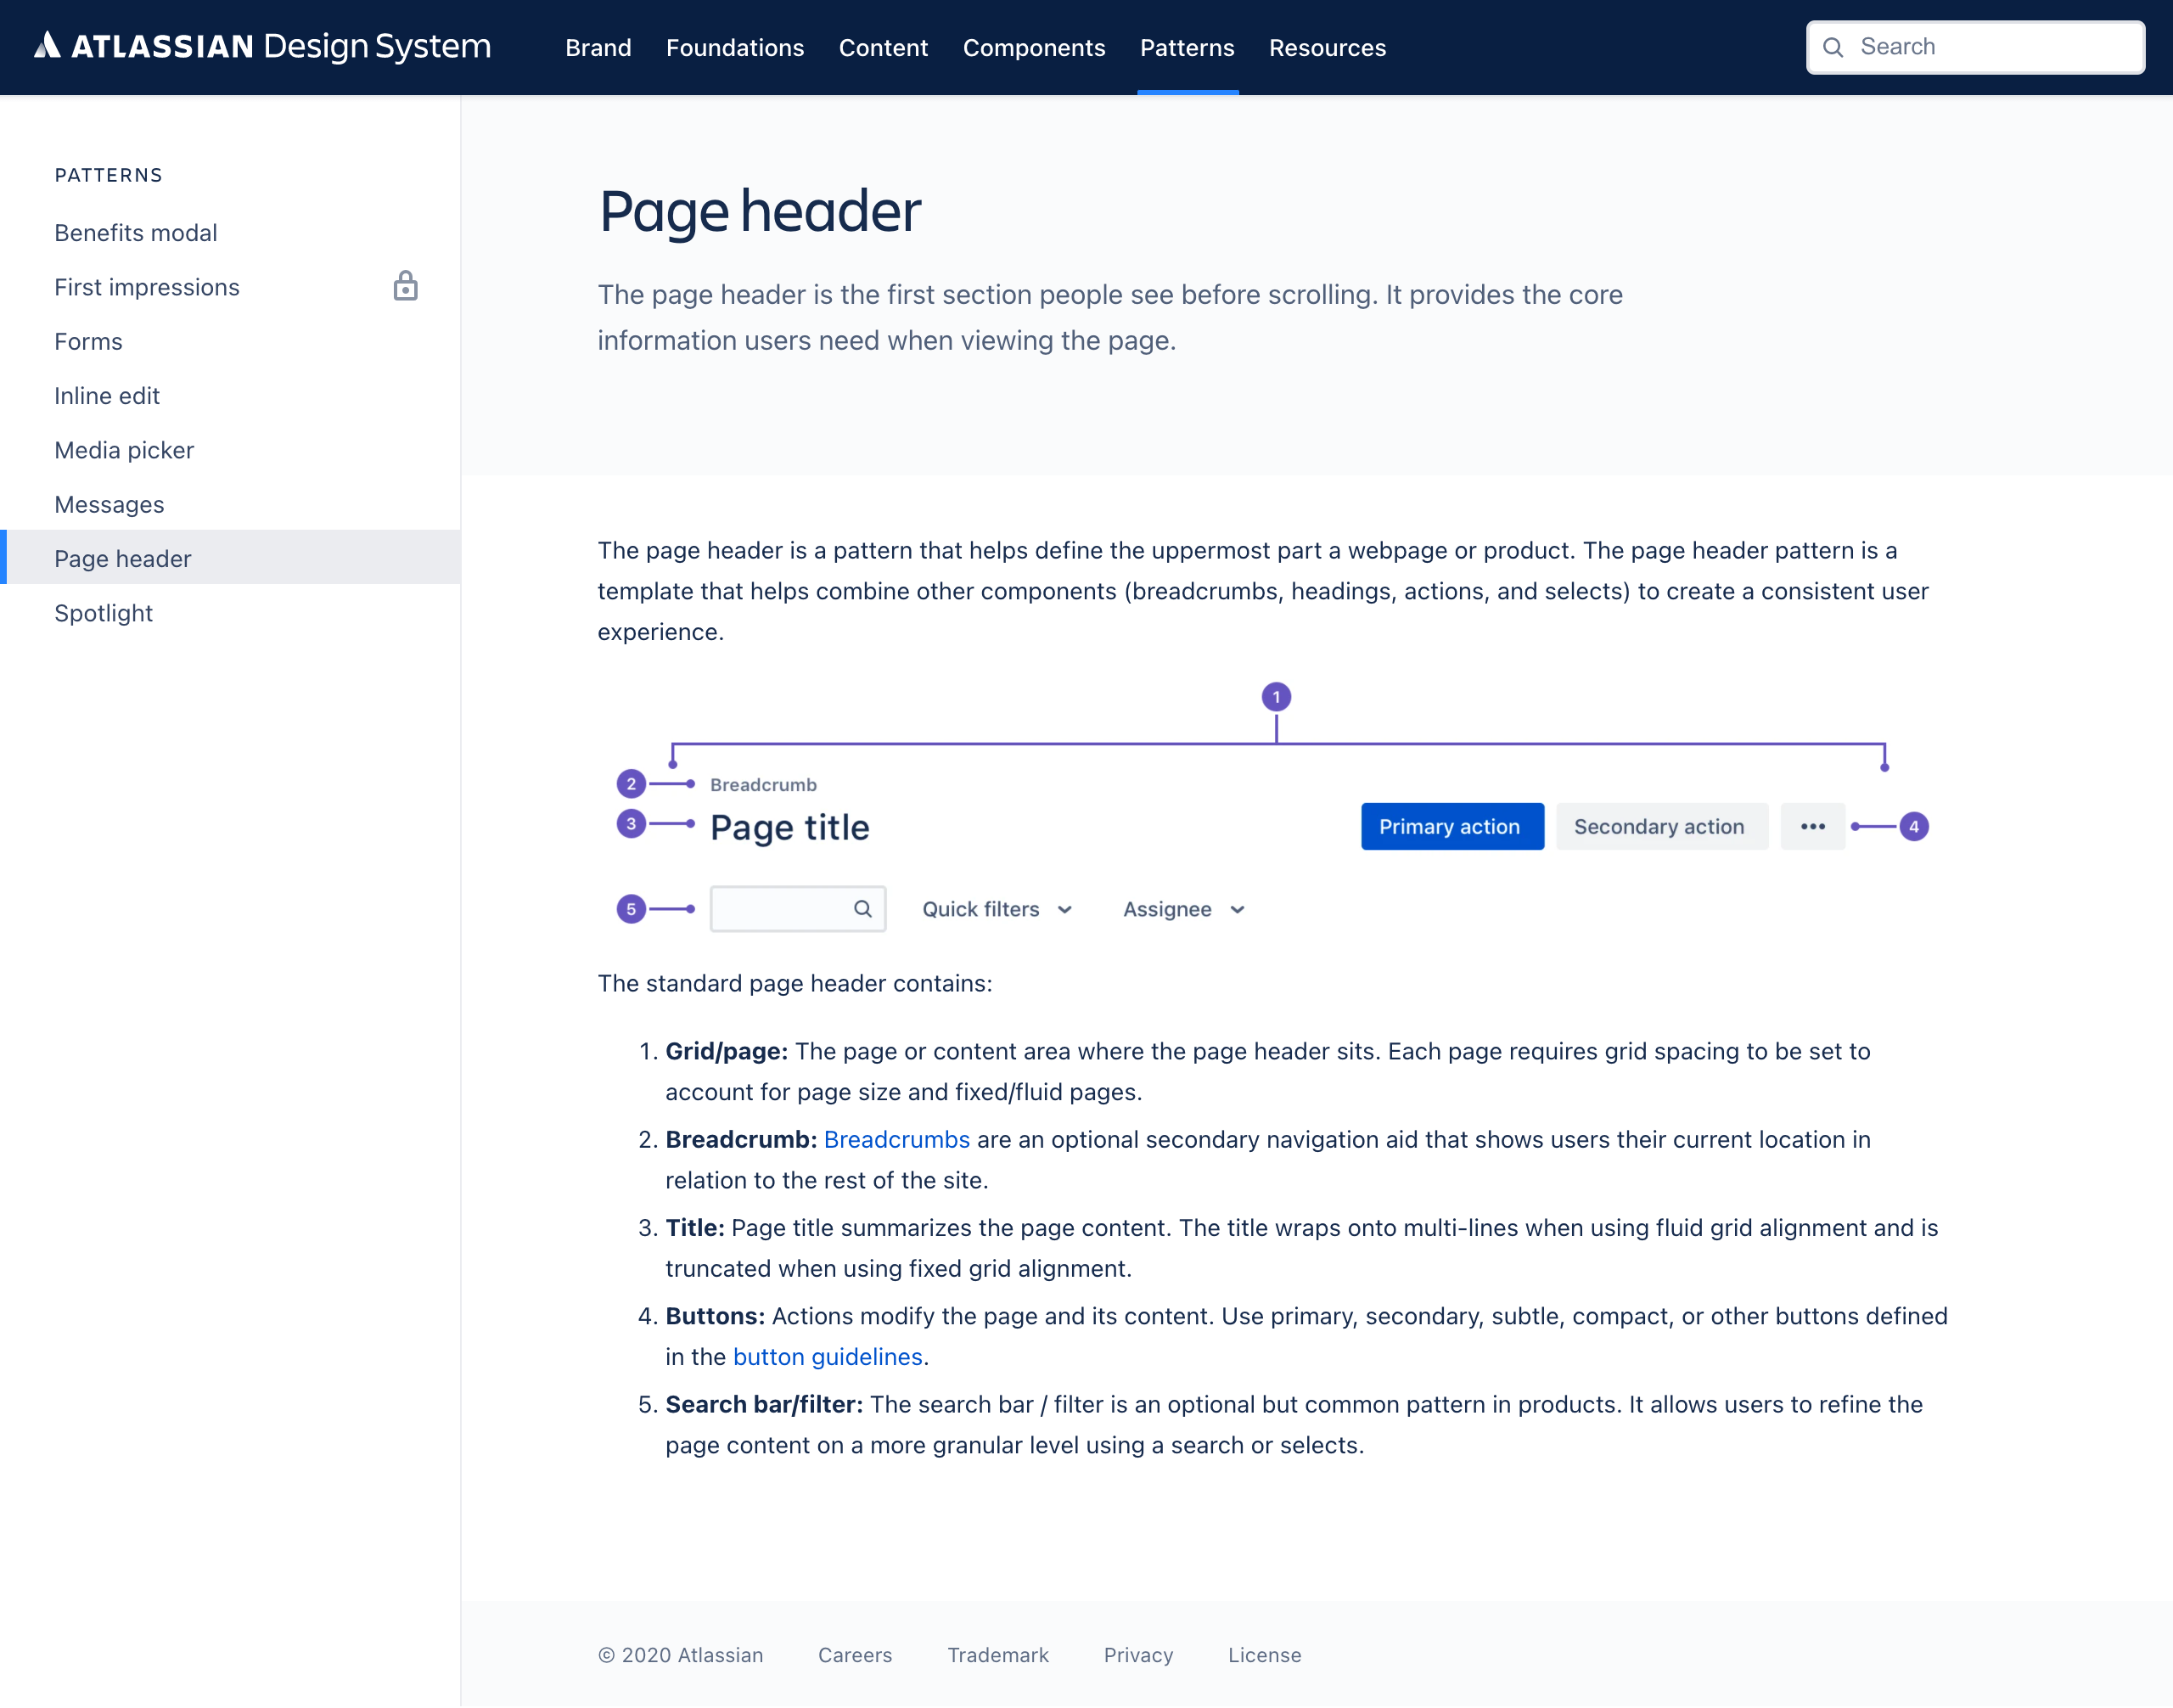 Atlassian's Pattern Library, demonstrating the Page Header pattern (and the components which comprise it)